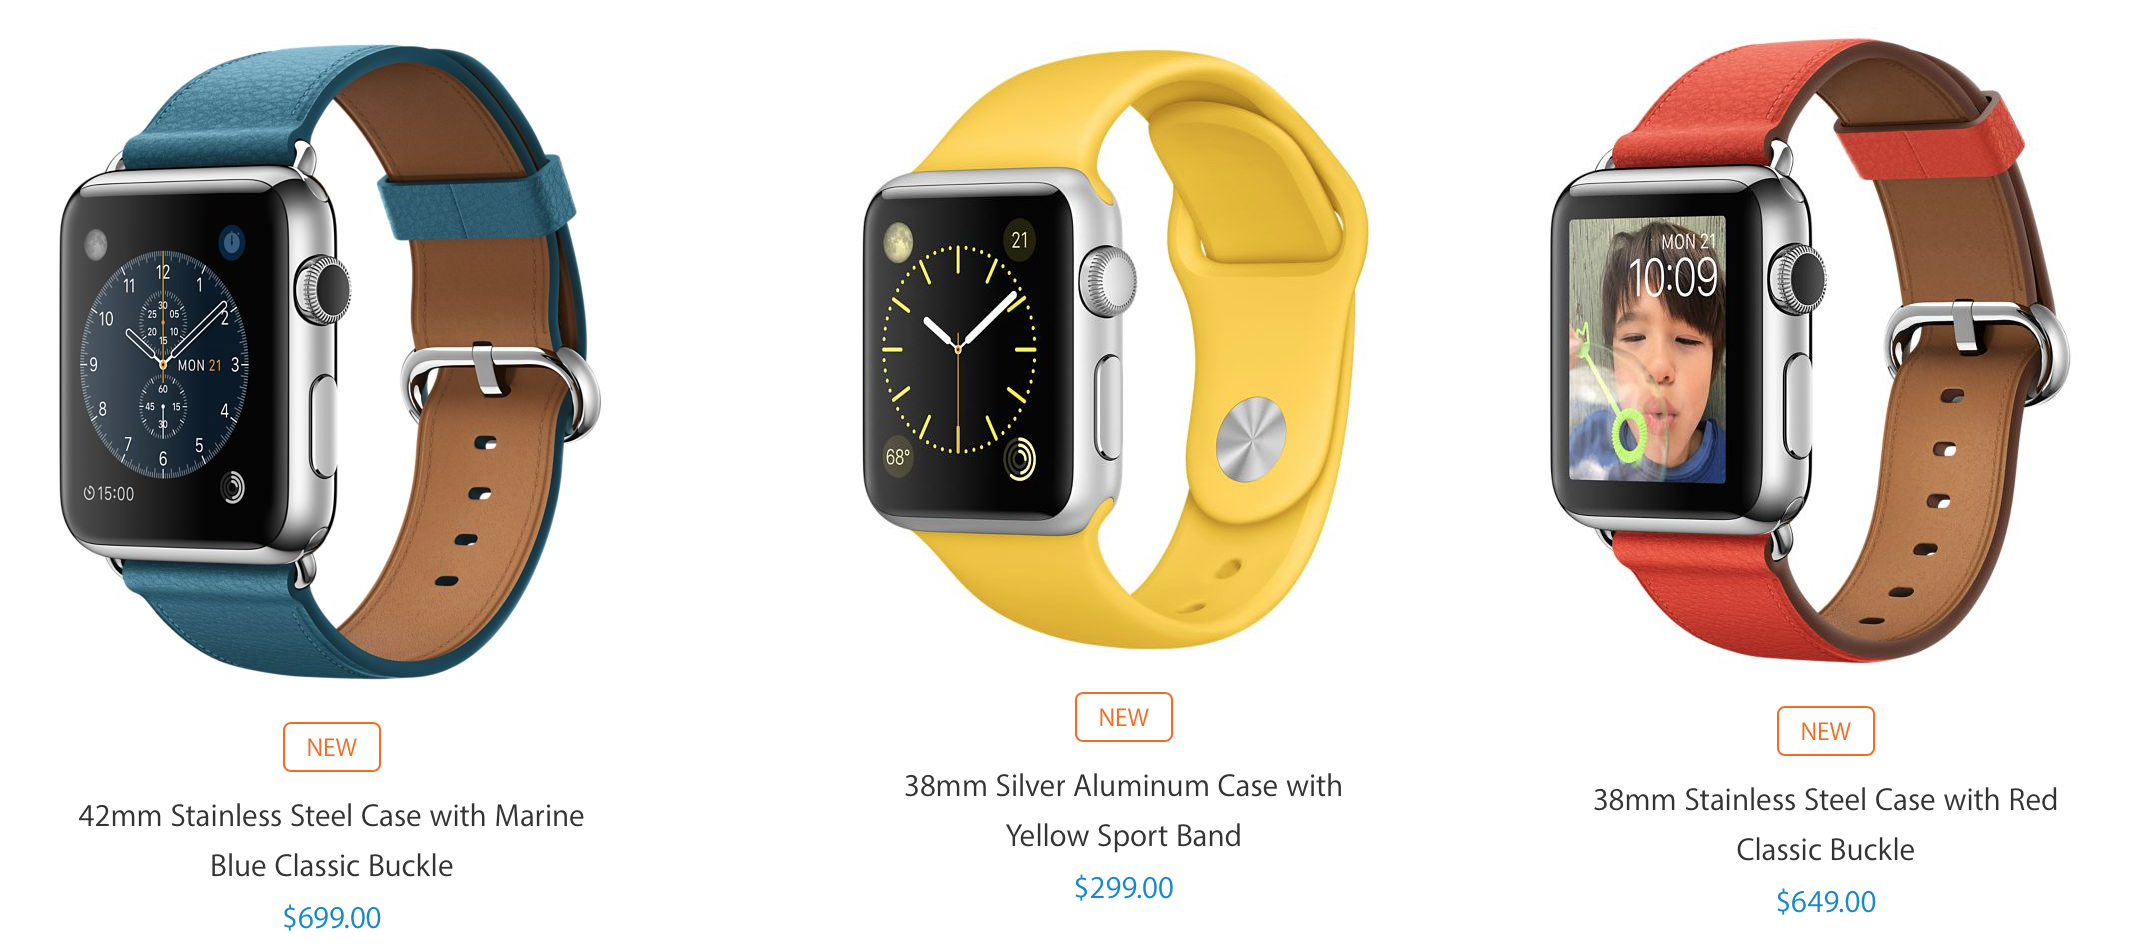 Apple Launches Variety Of New Apple Watch Models And Band Colors